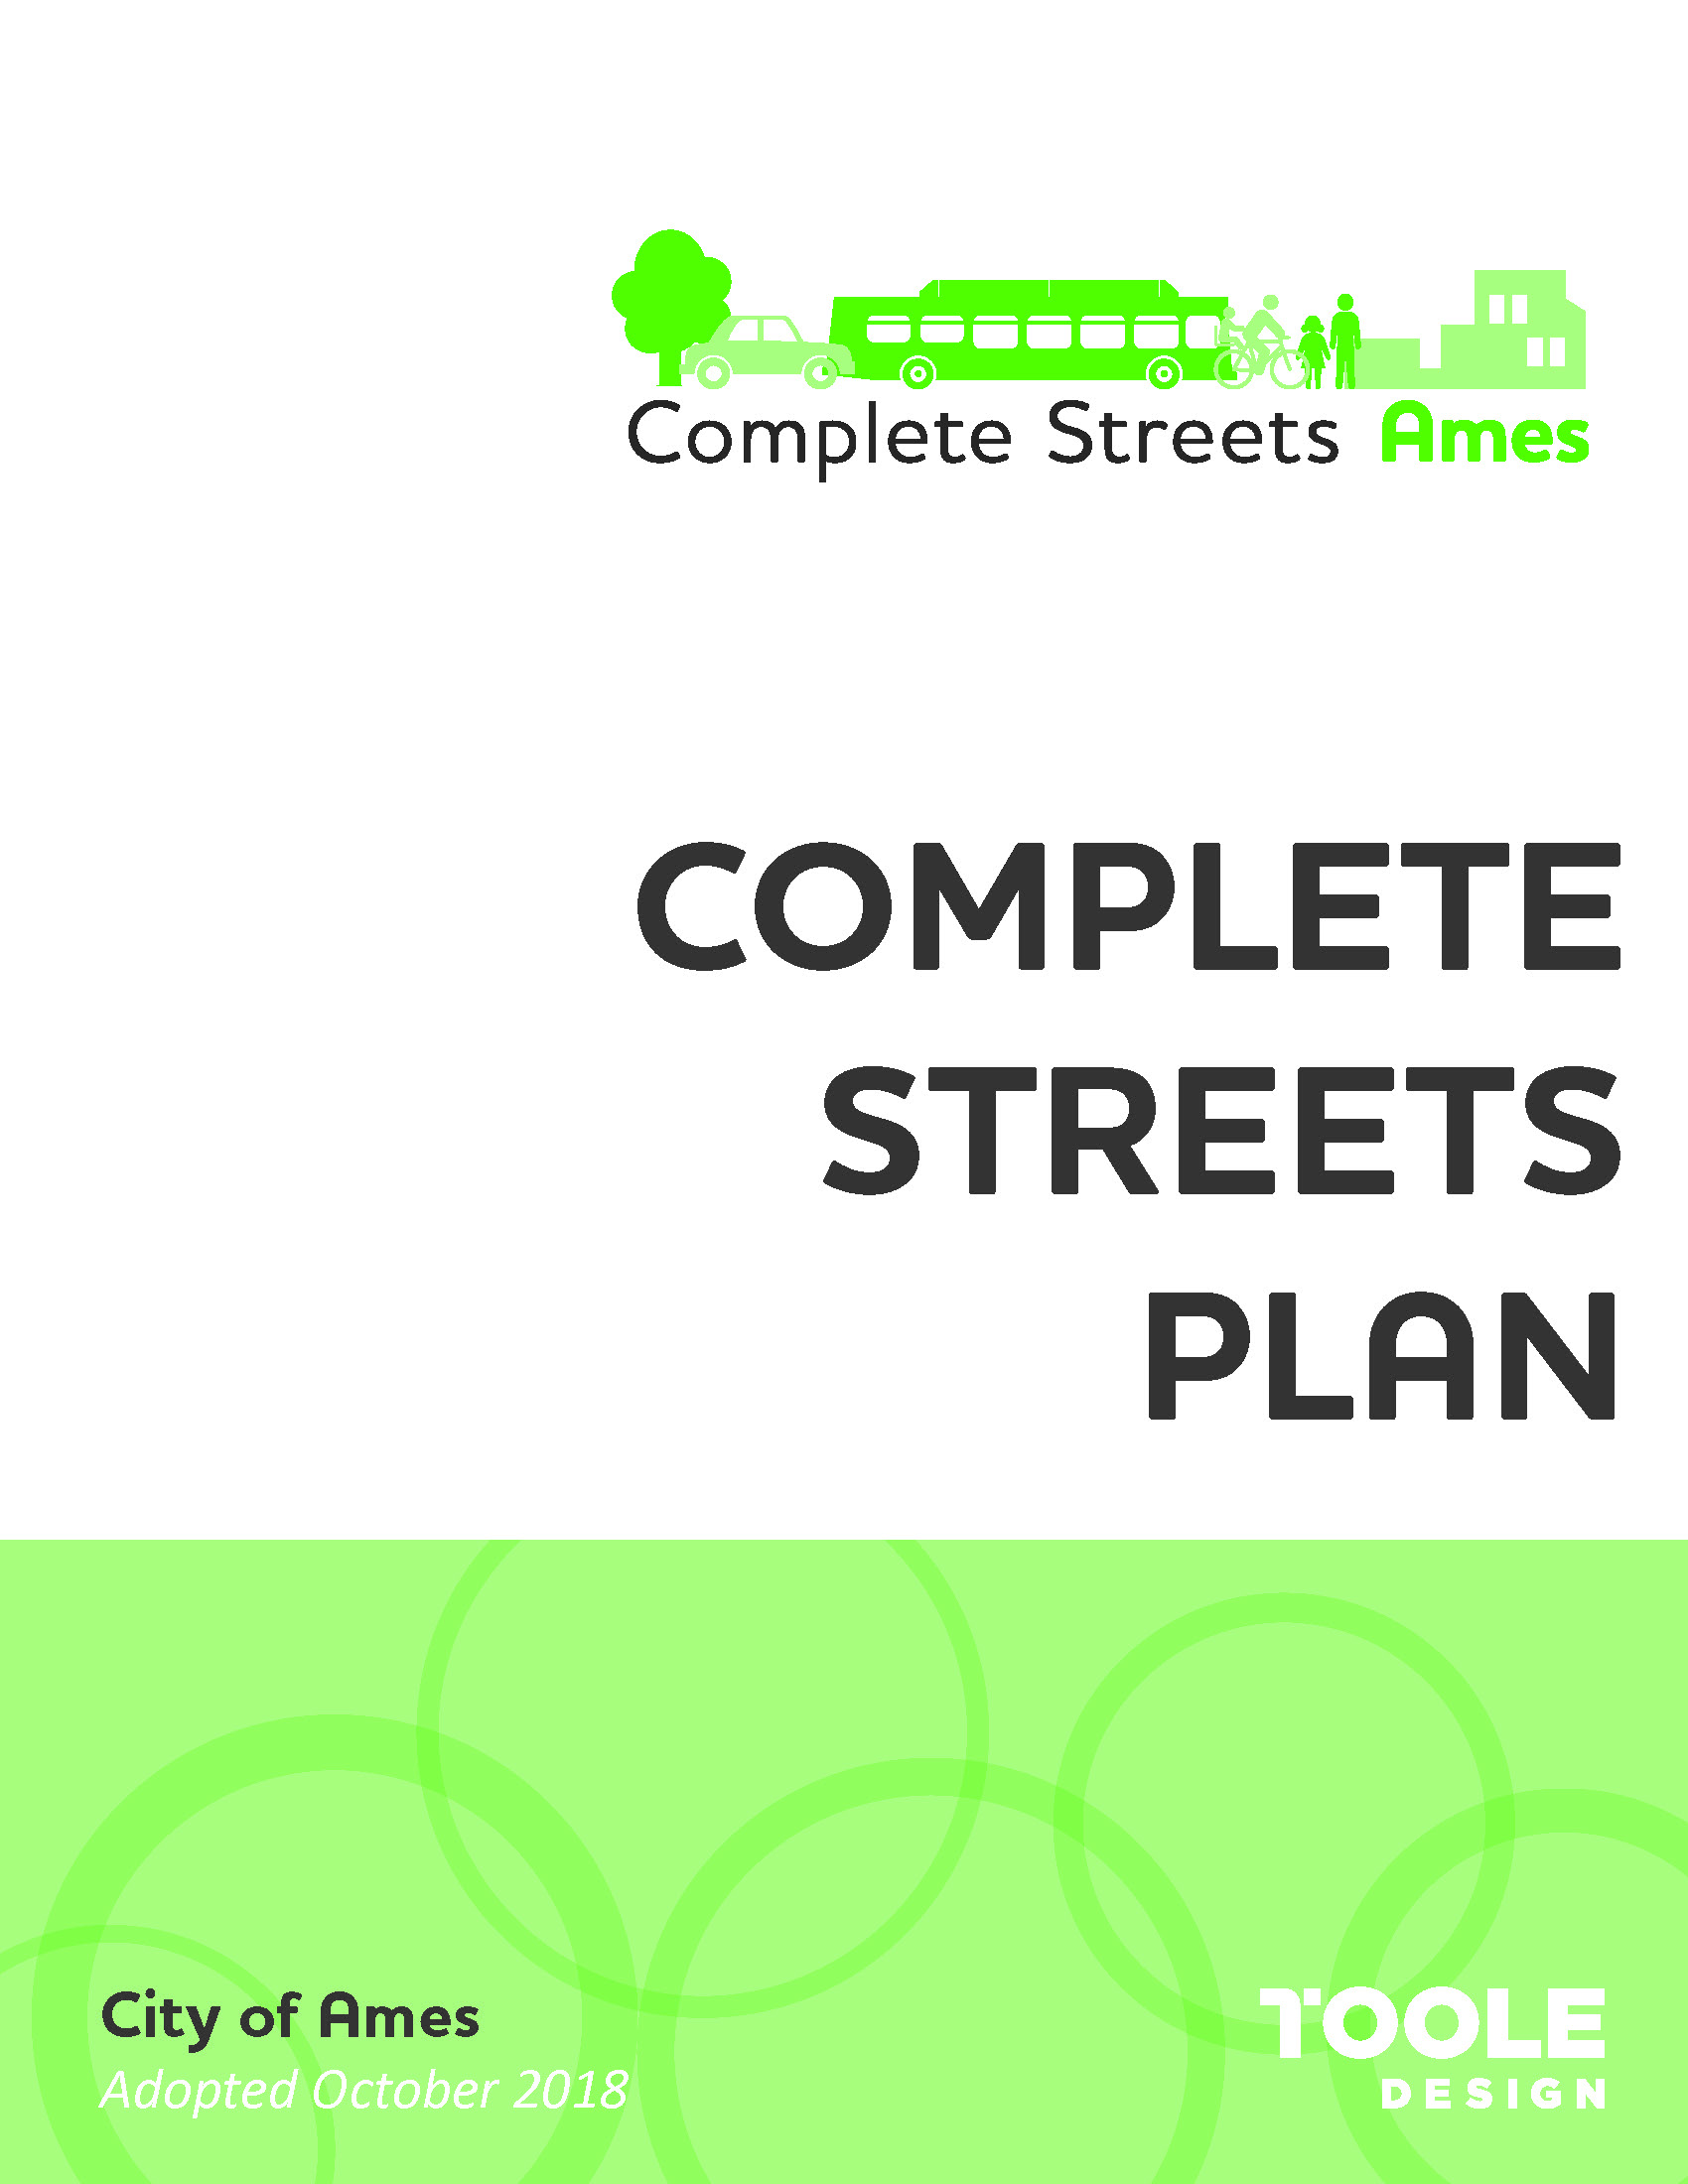 Ames Complete Streets cover